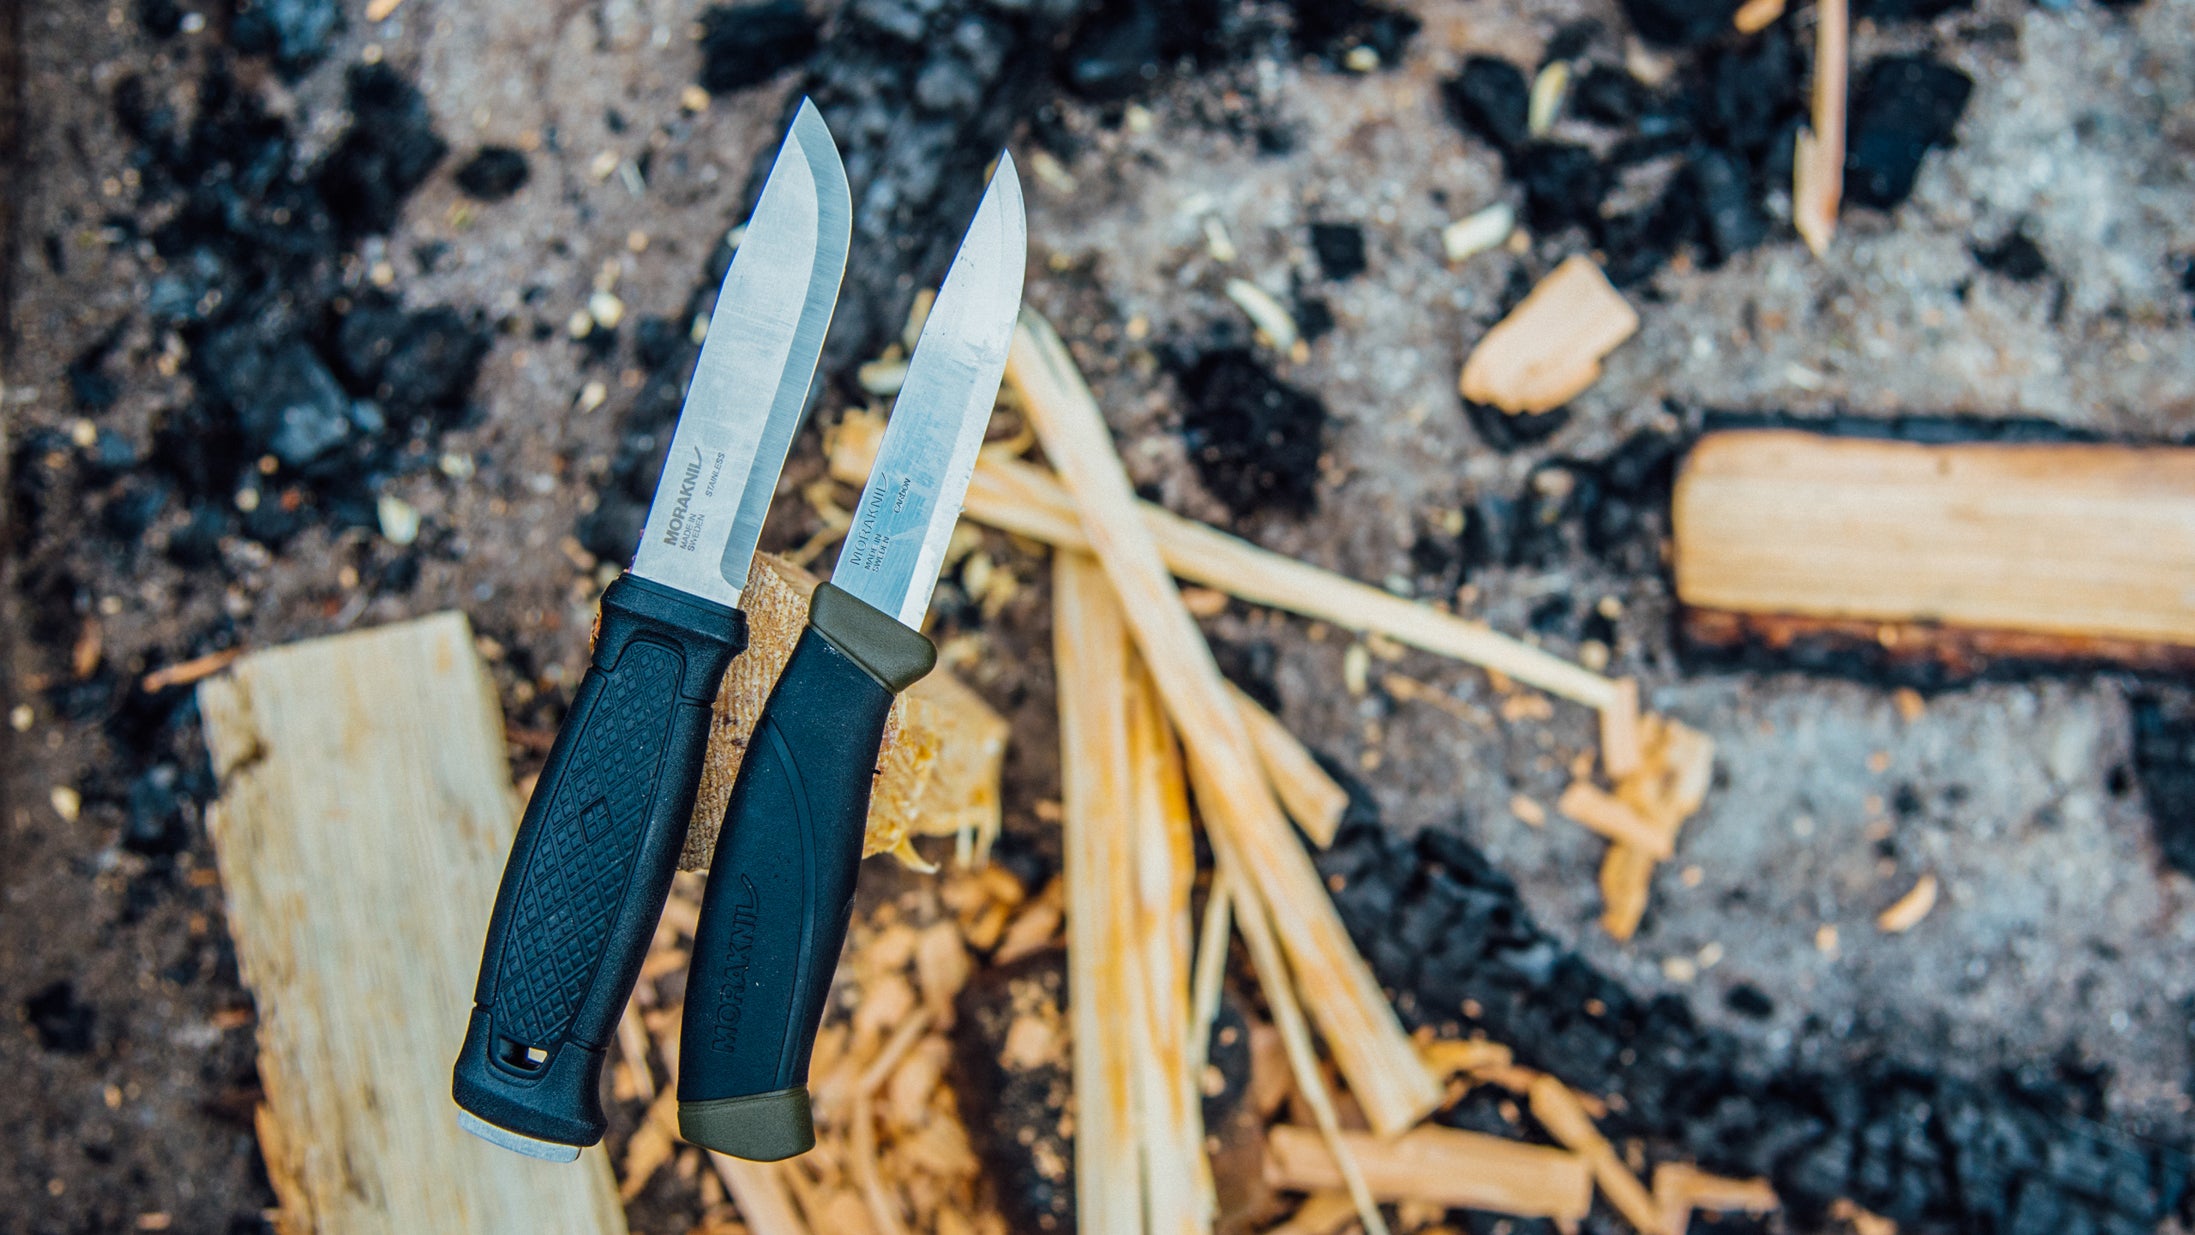 Morakniv Just Launched the Knife You Asked for, But Is It Really Better  Than the Classic Companion?